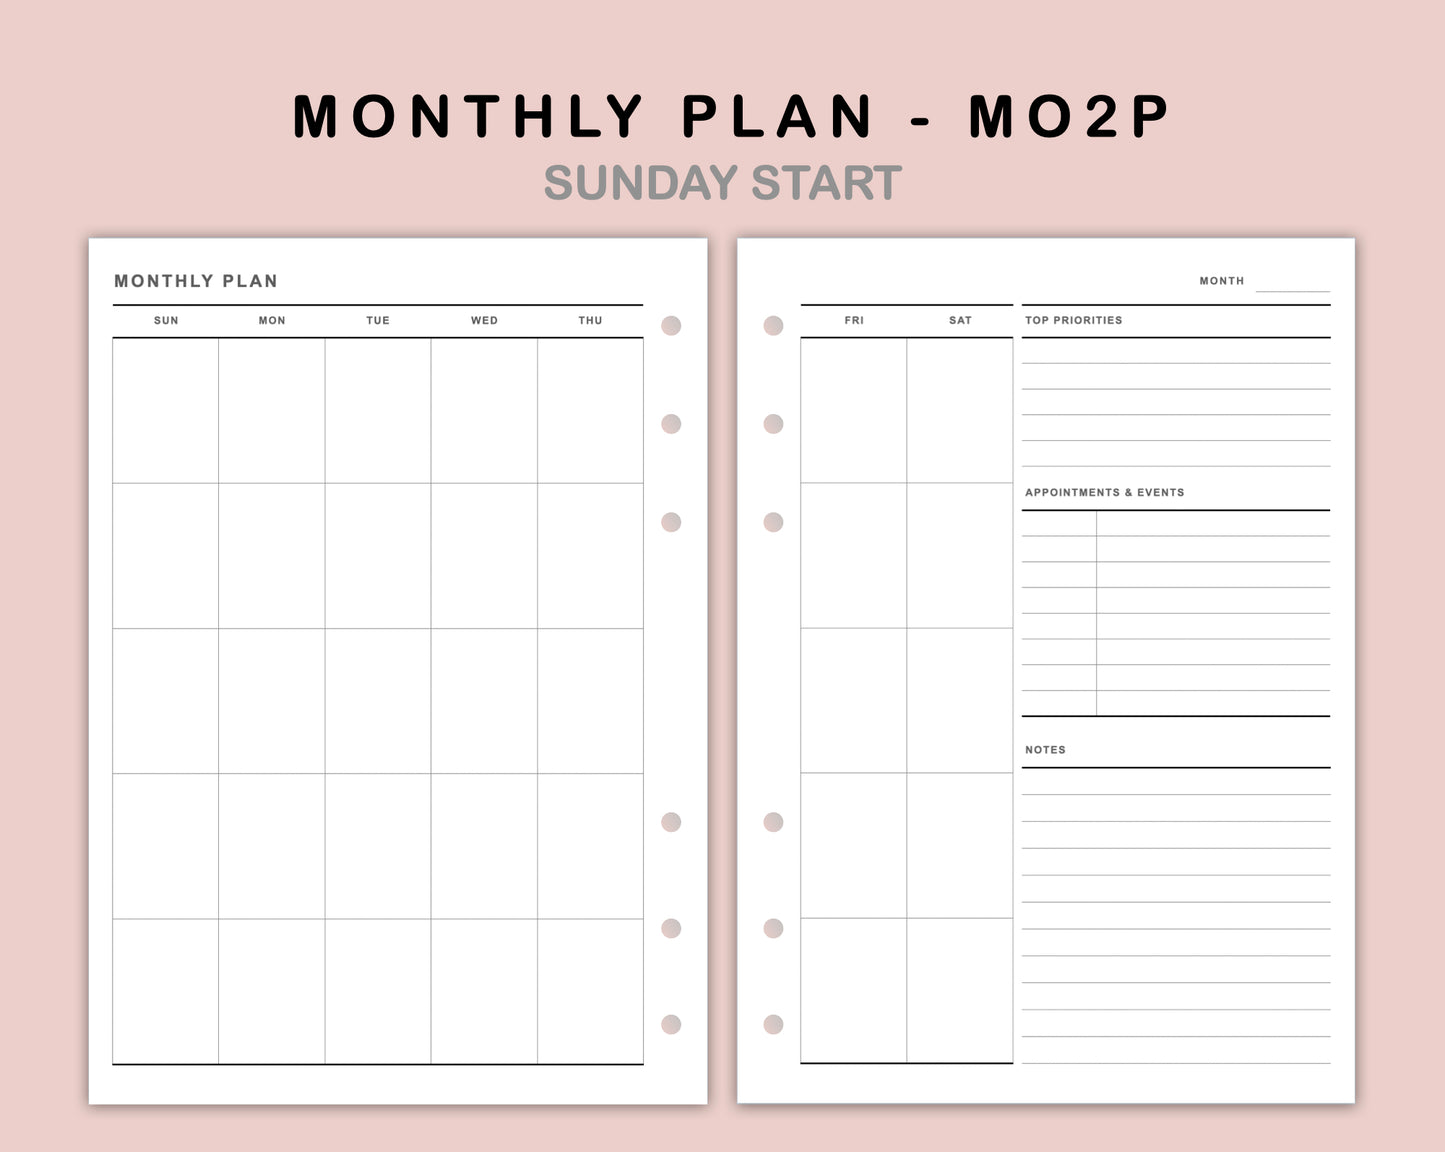 B6 Inserts - Monthly Plan - MO2P - with Top Priority